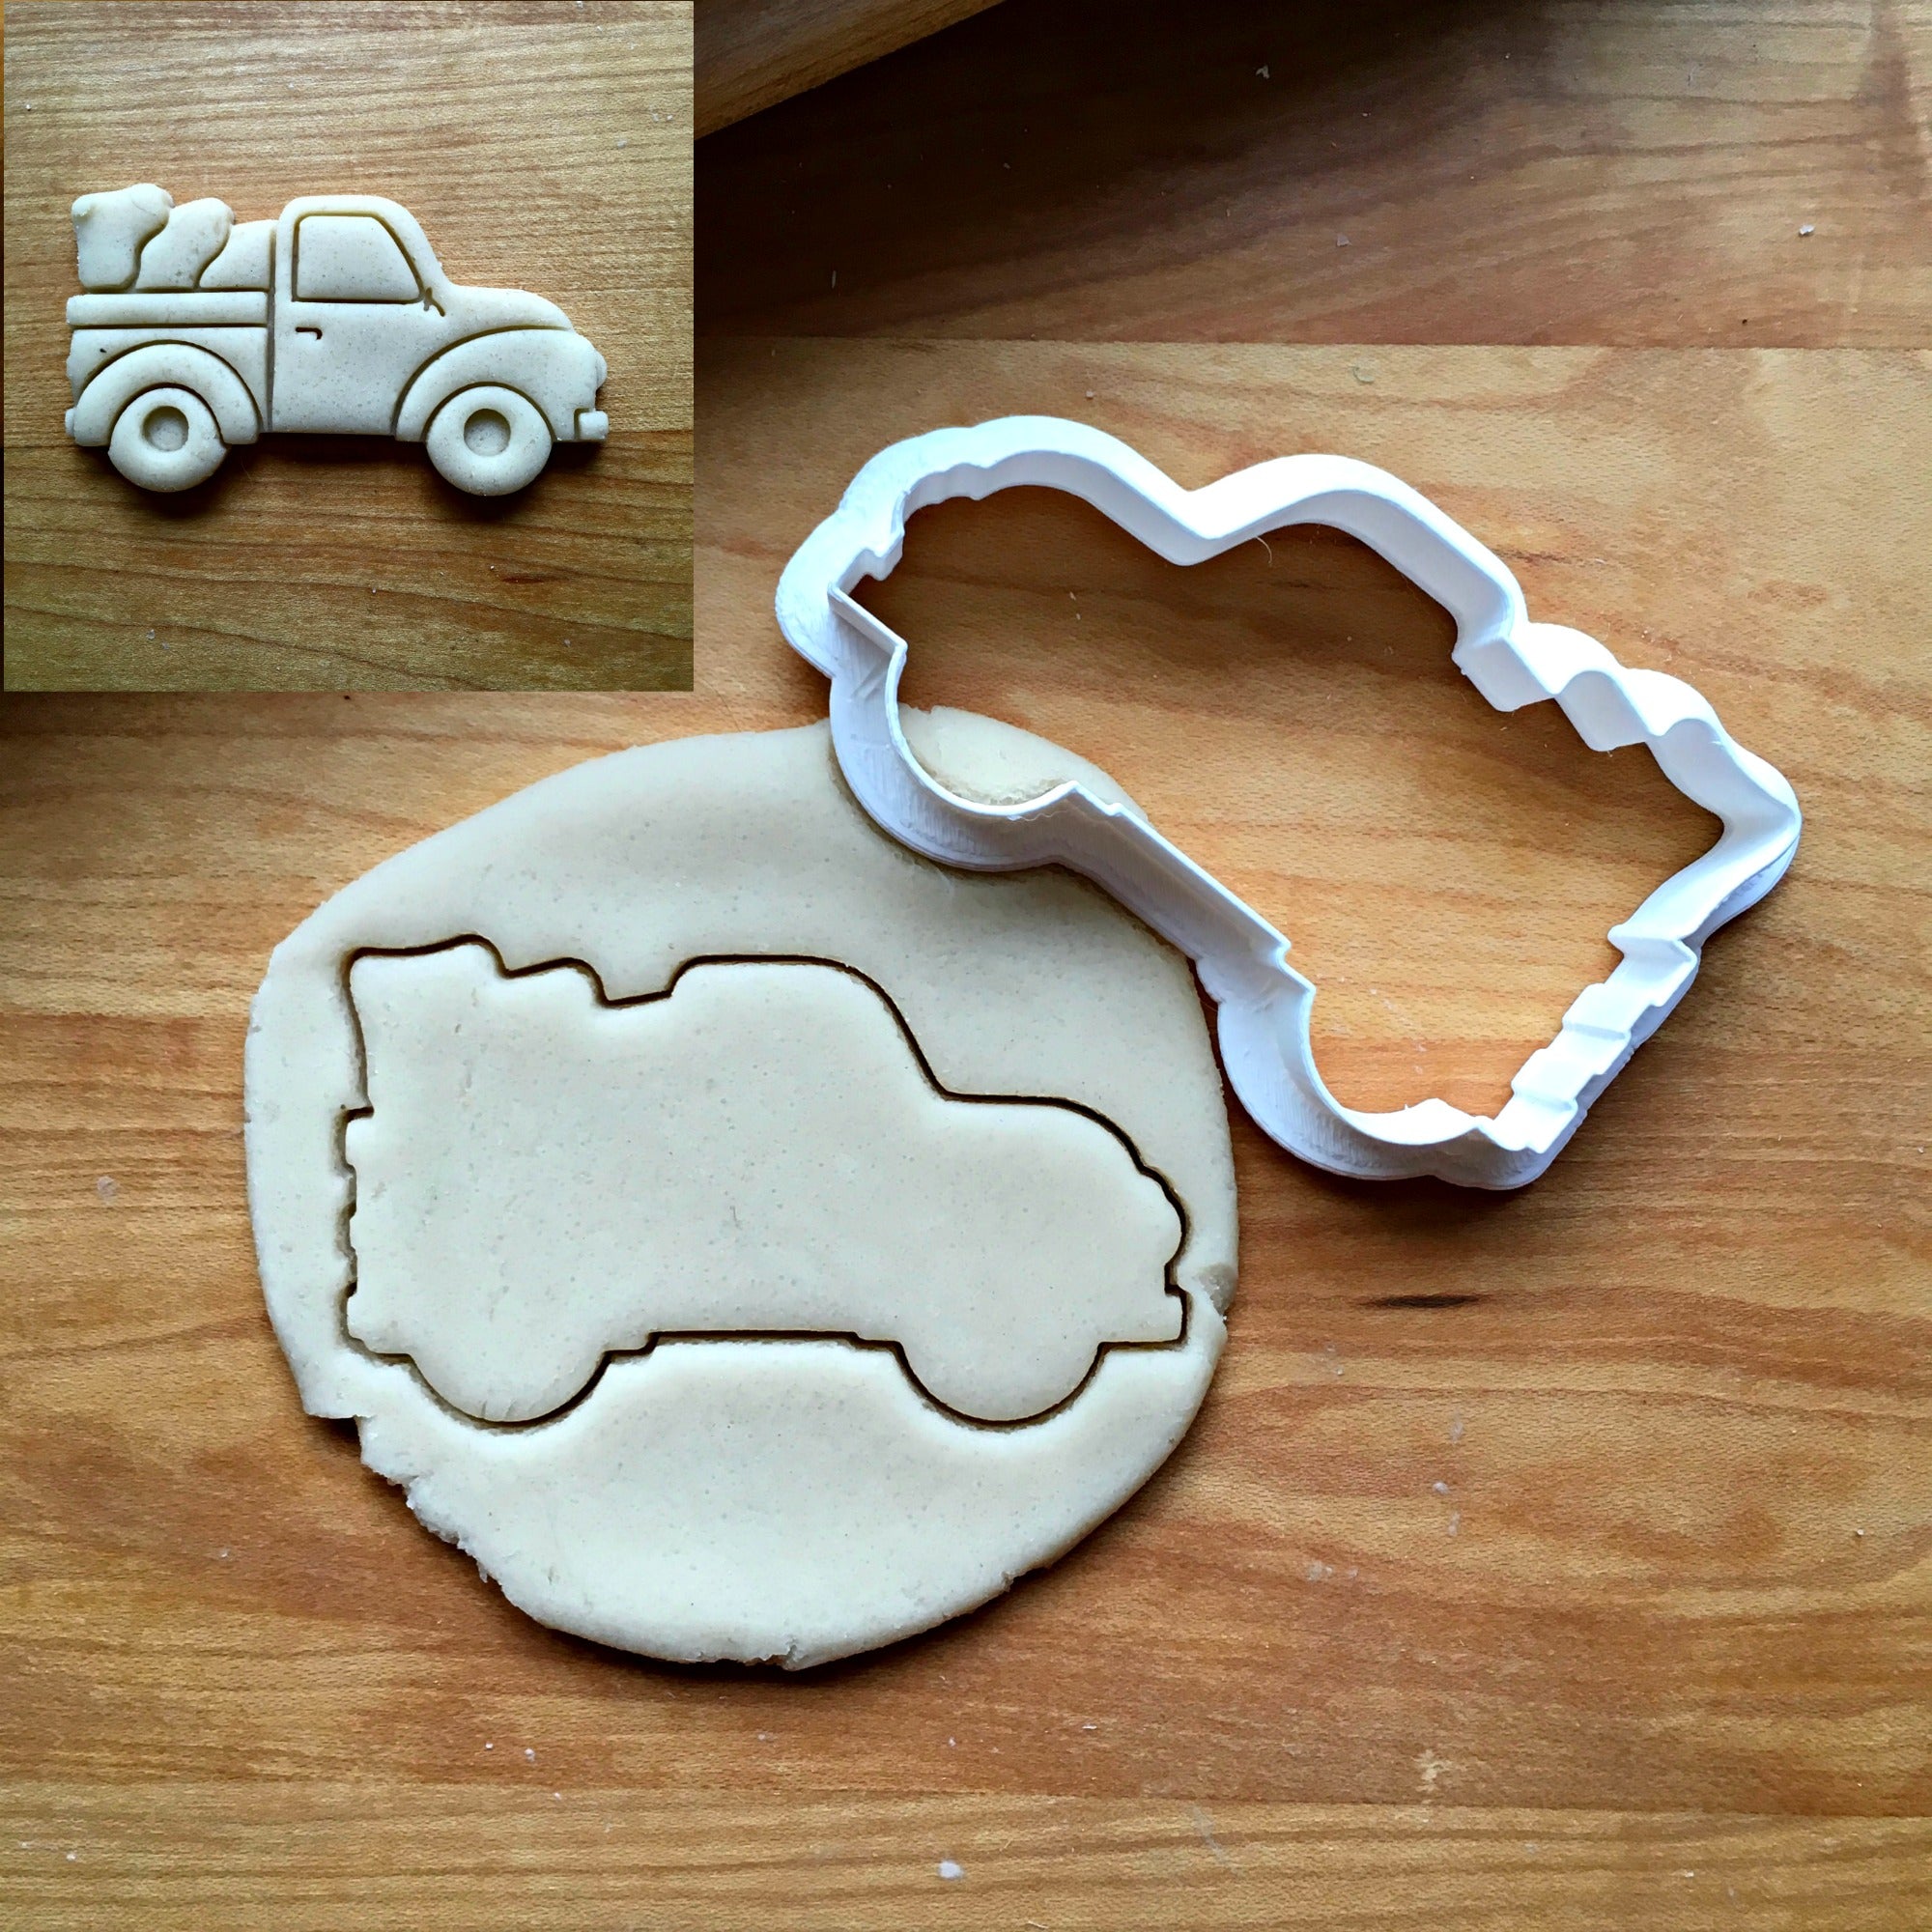 Pickup Truck with Tree Cookie Cutter/Dishwasher Safe